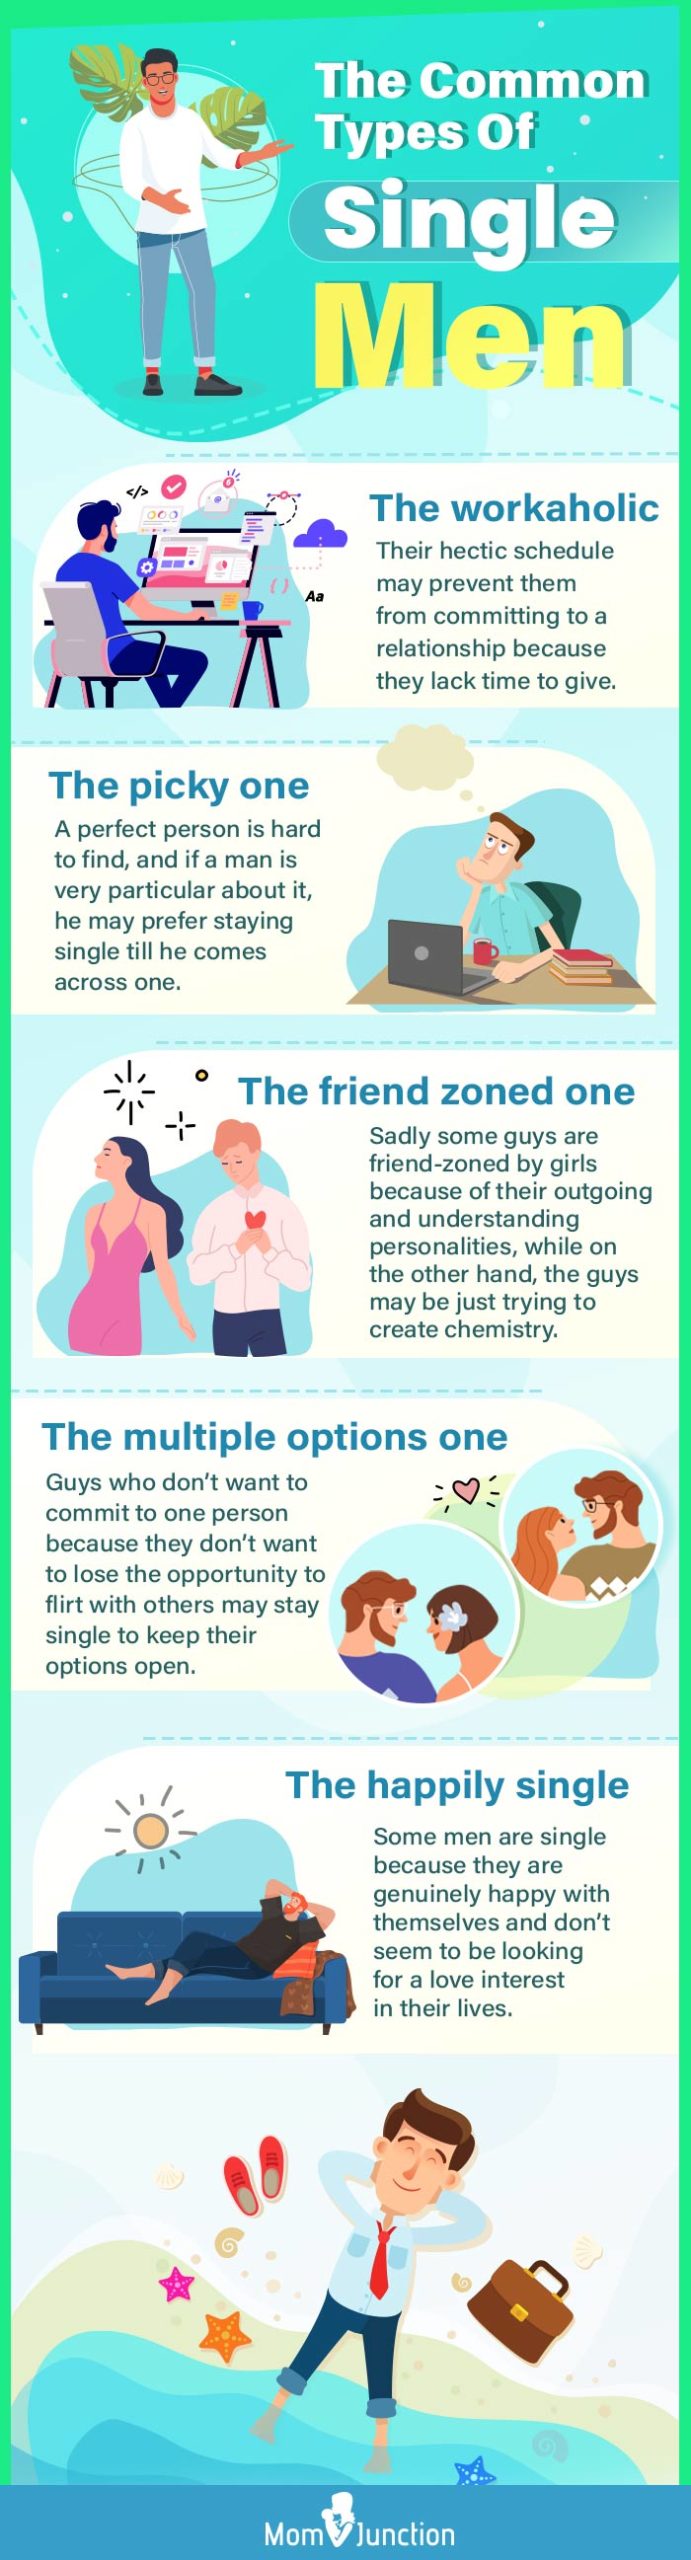 the common types of single men (infographic)